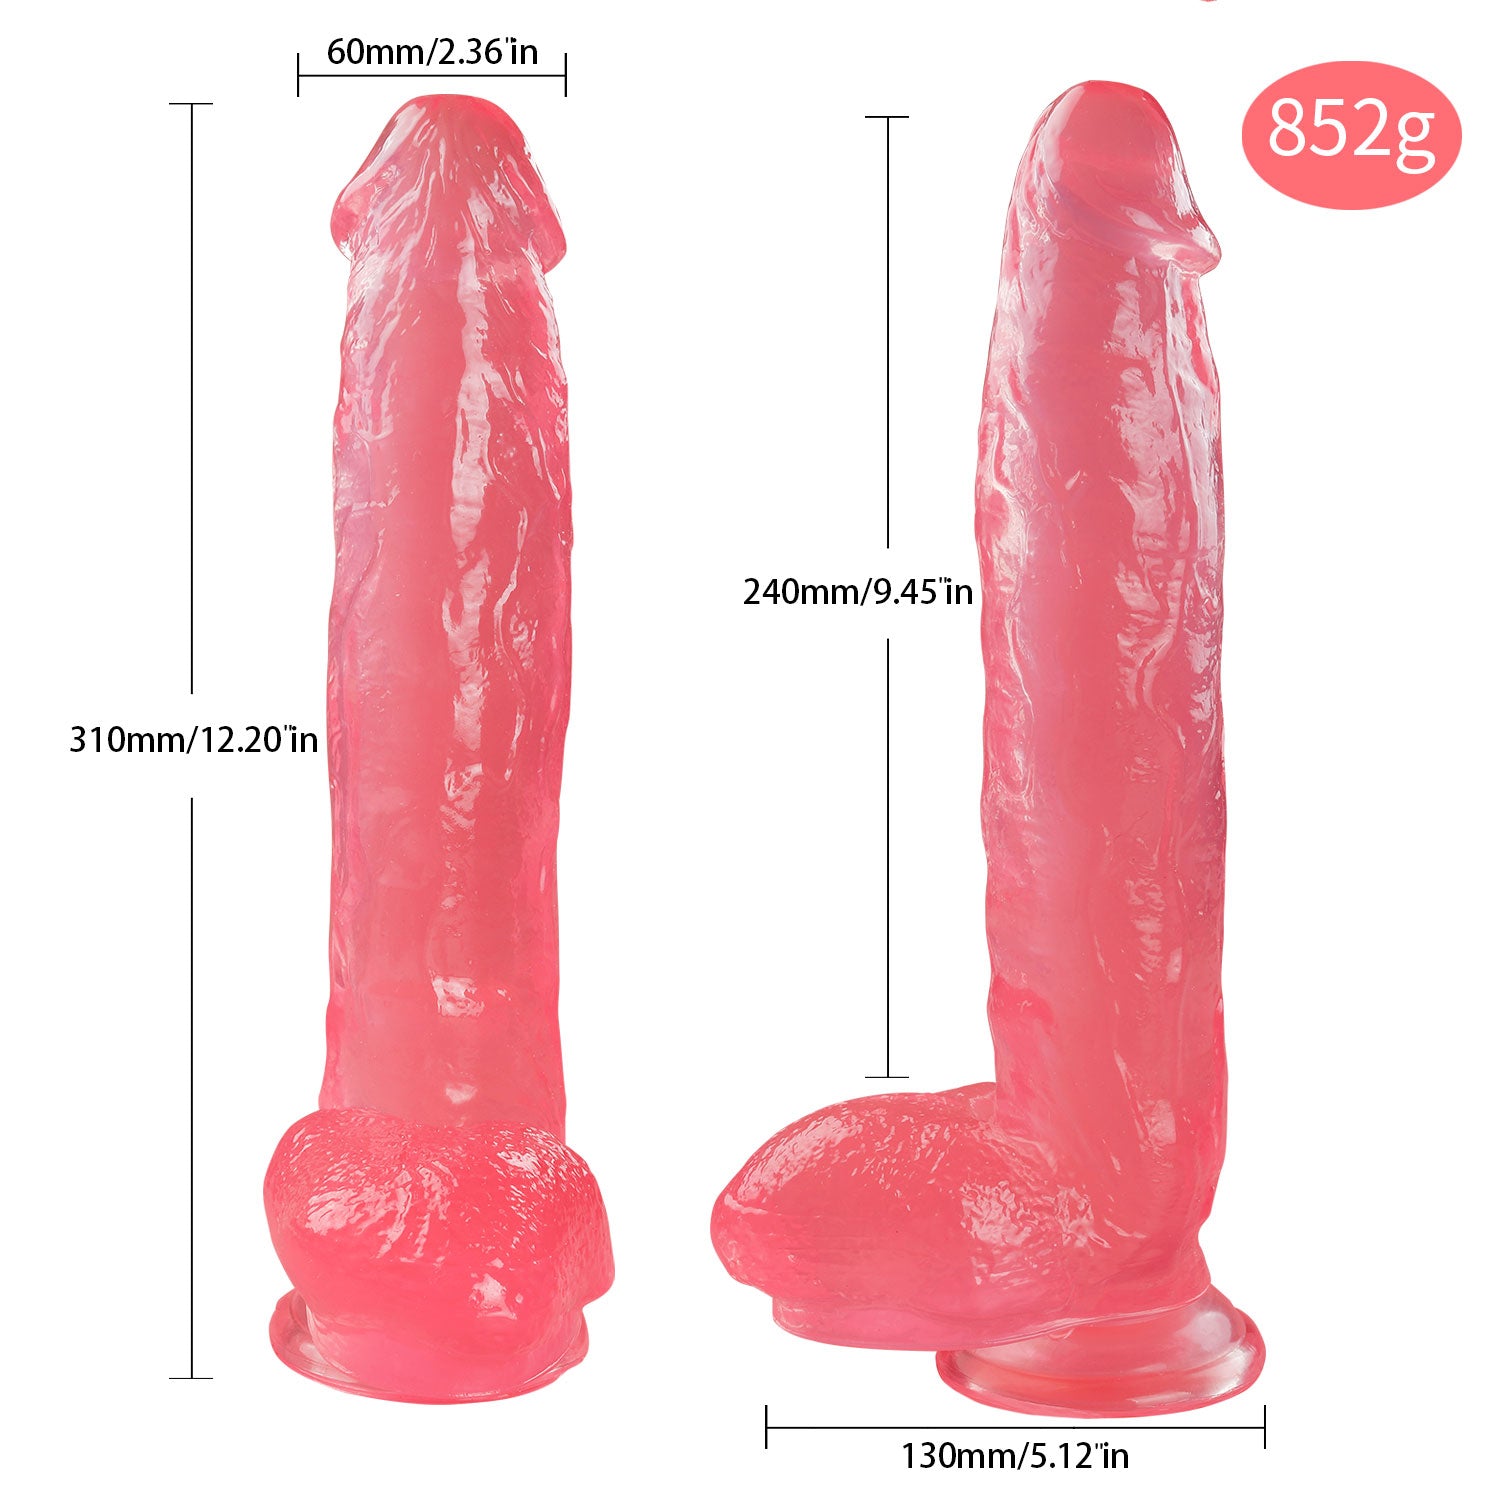 MD Monster 31cm Realistic Dildo with Suction Cup - Black